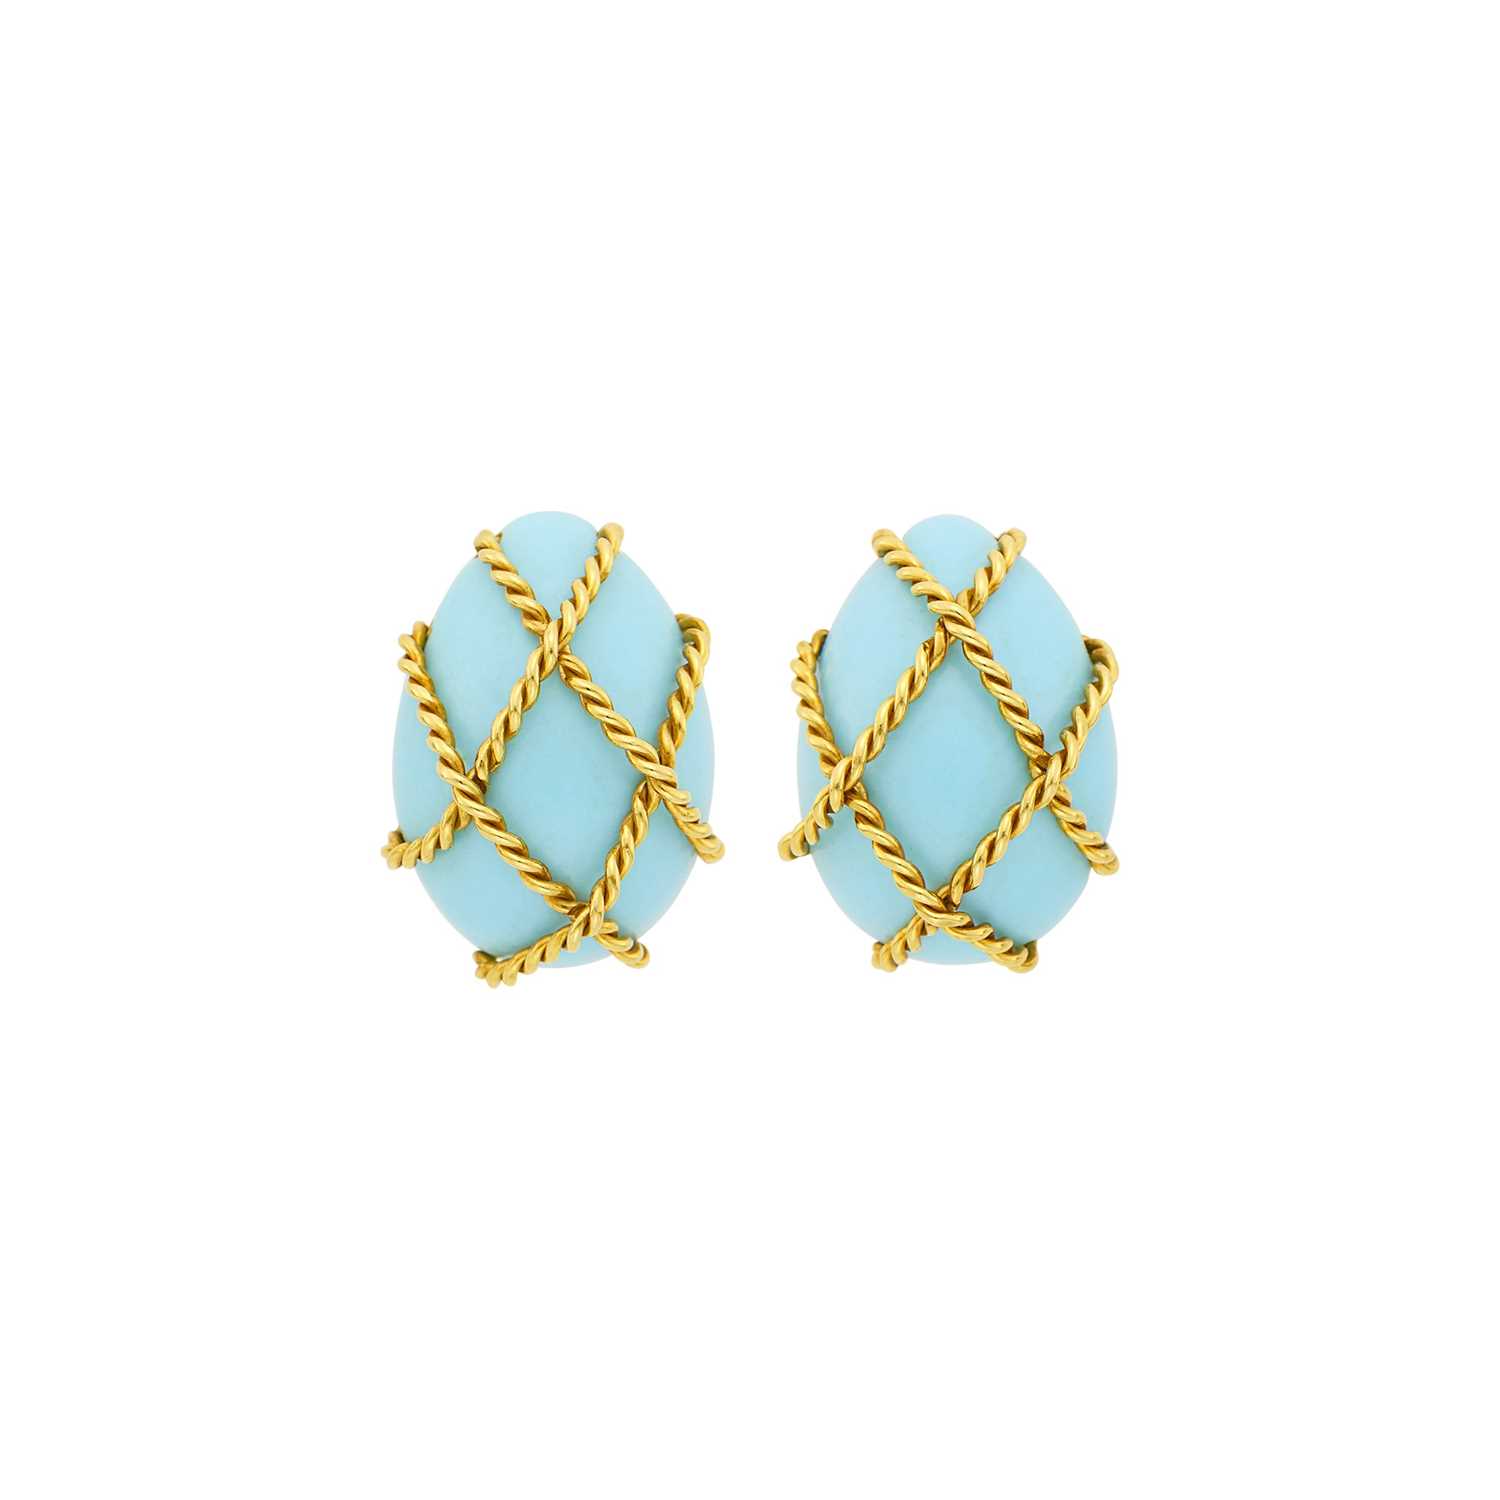 Lot 1013 - Seaman Schepps Pair of Gold and Turquoise Earclips